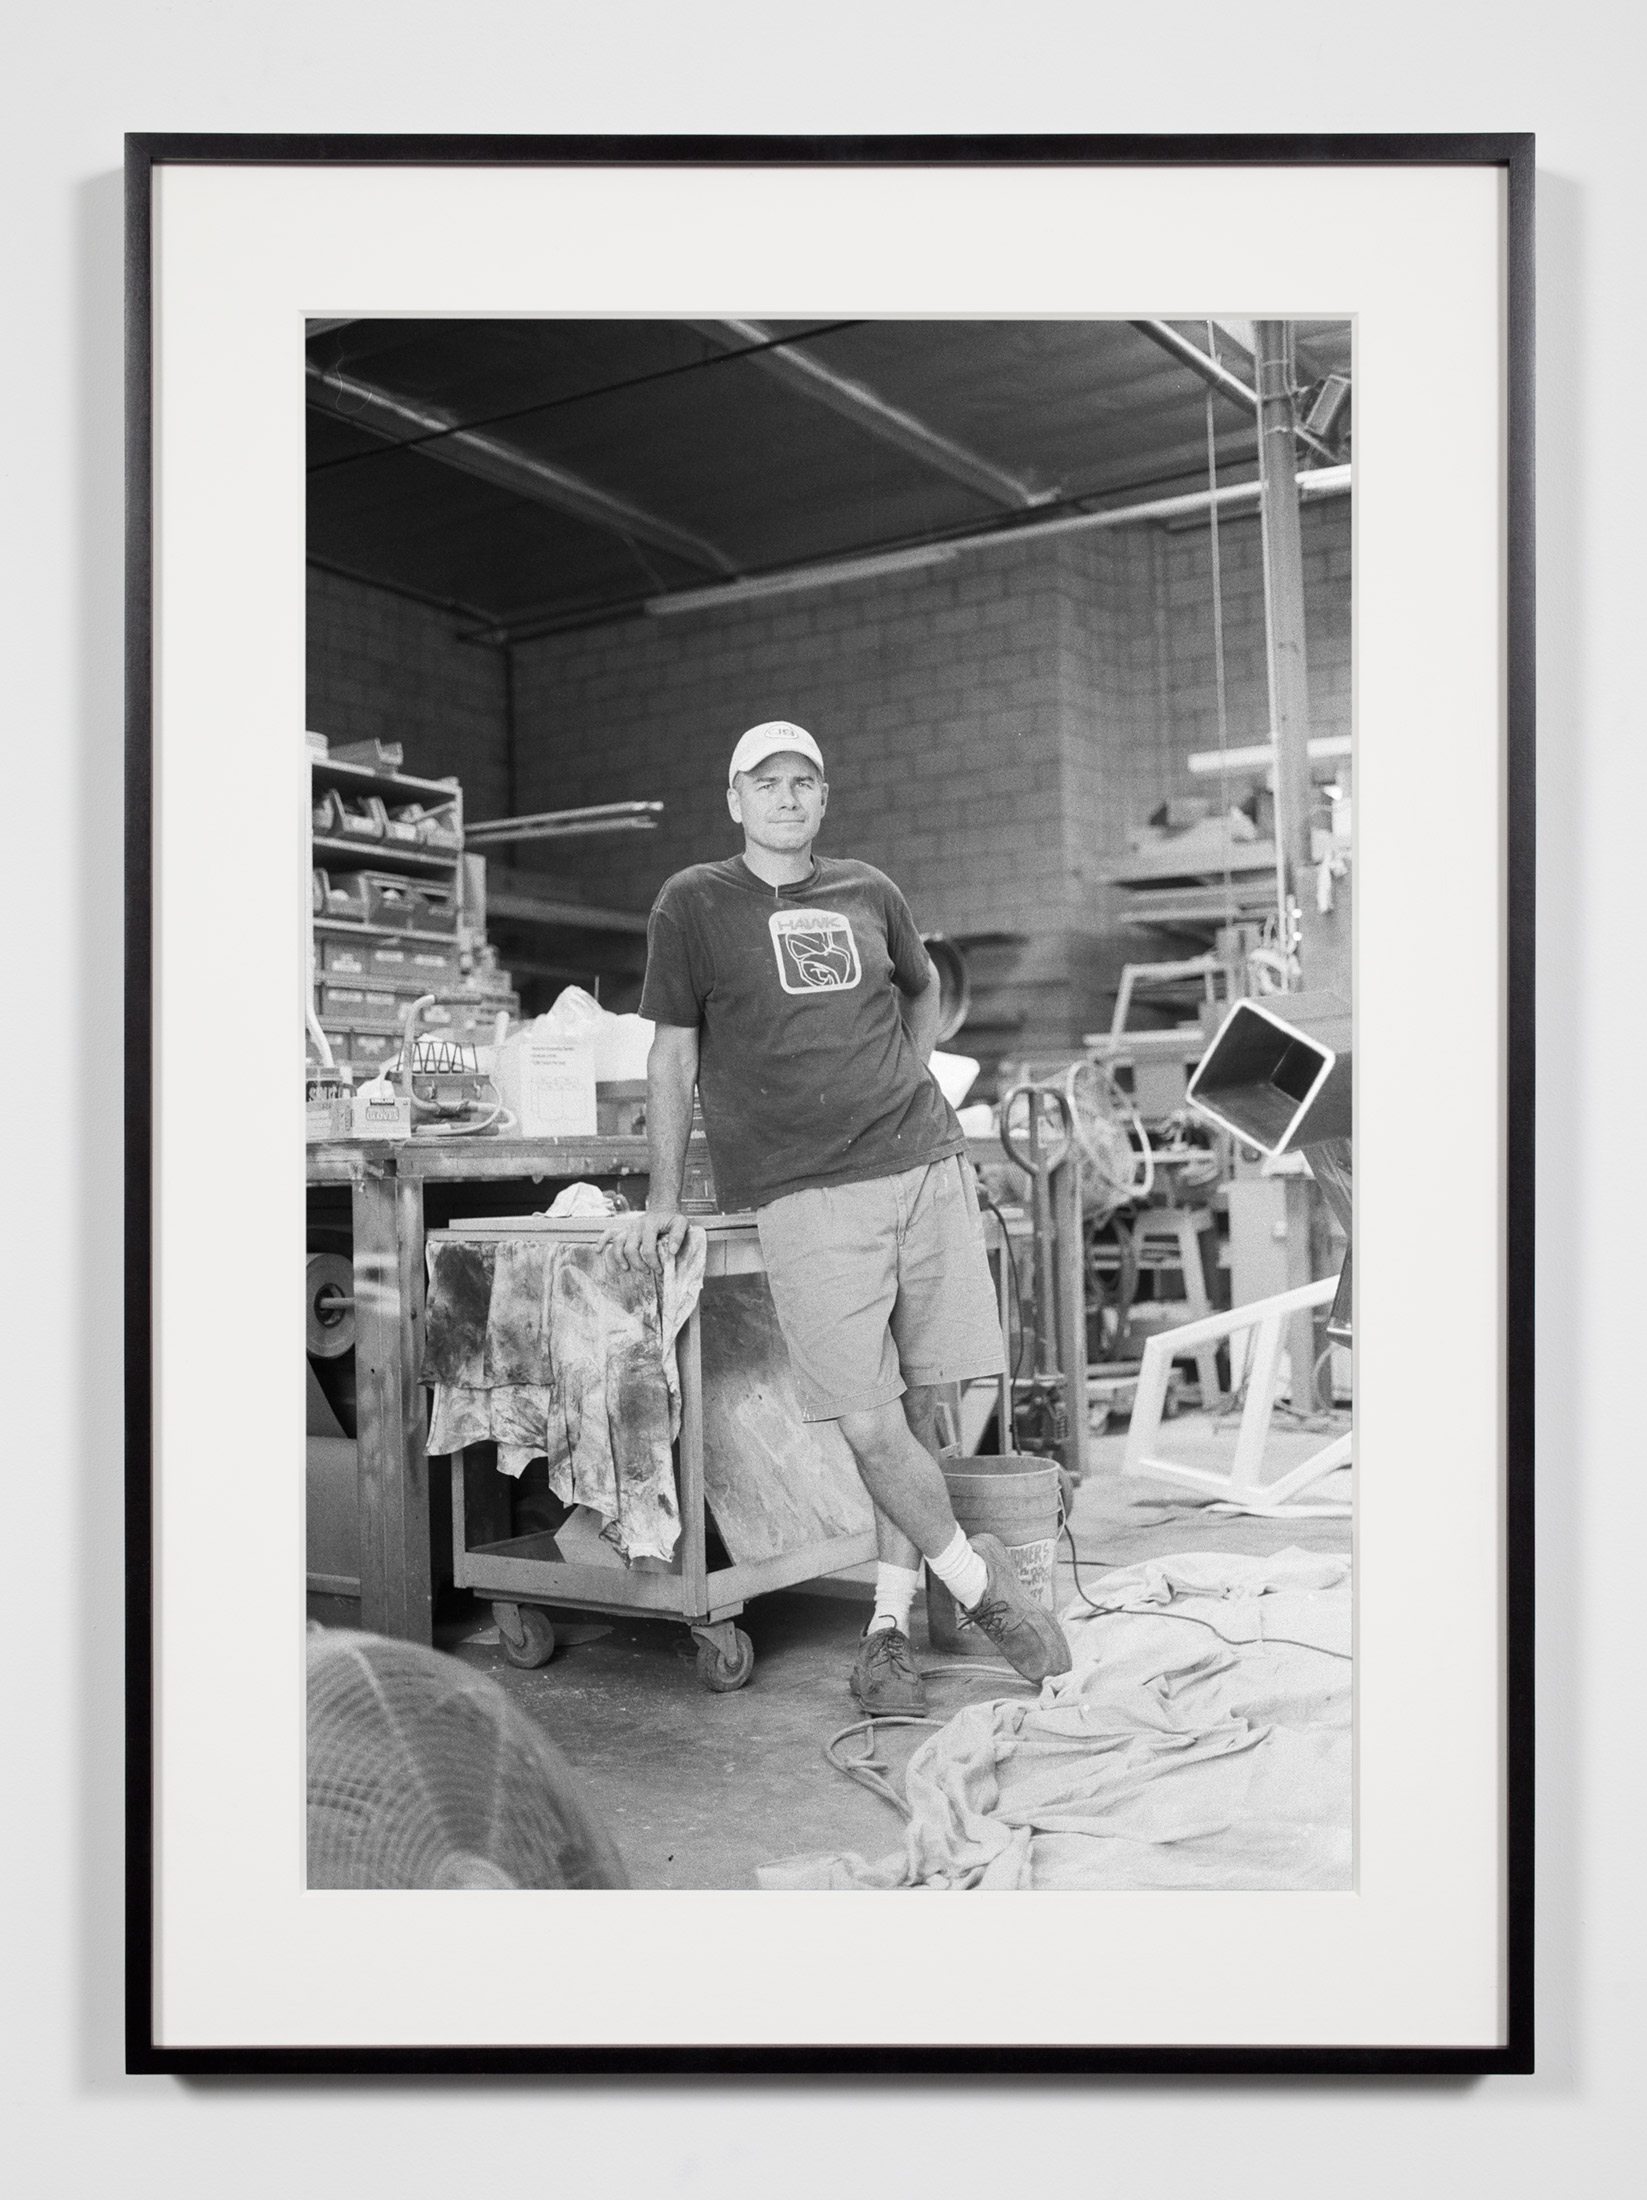   Fabricator, Glendale, California, July 9, 2008    2011   Epson Ultrachrome K3 archival ink jet print on Hahnemühle Photo Rag paper  36 3/8 x 26 3/8 inches   Industrial Portraits, 2008–     